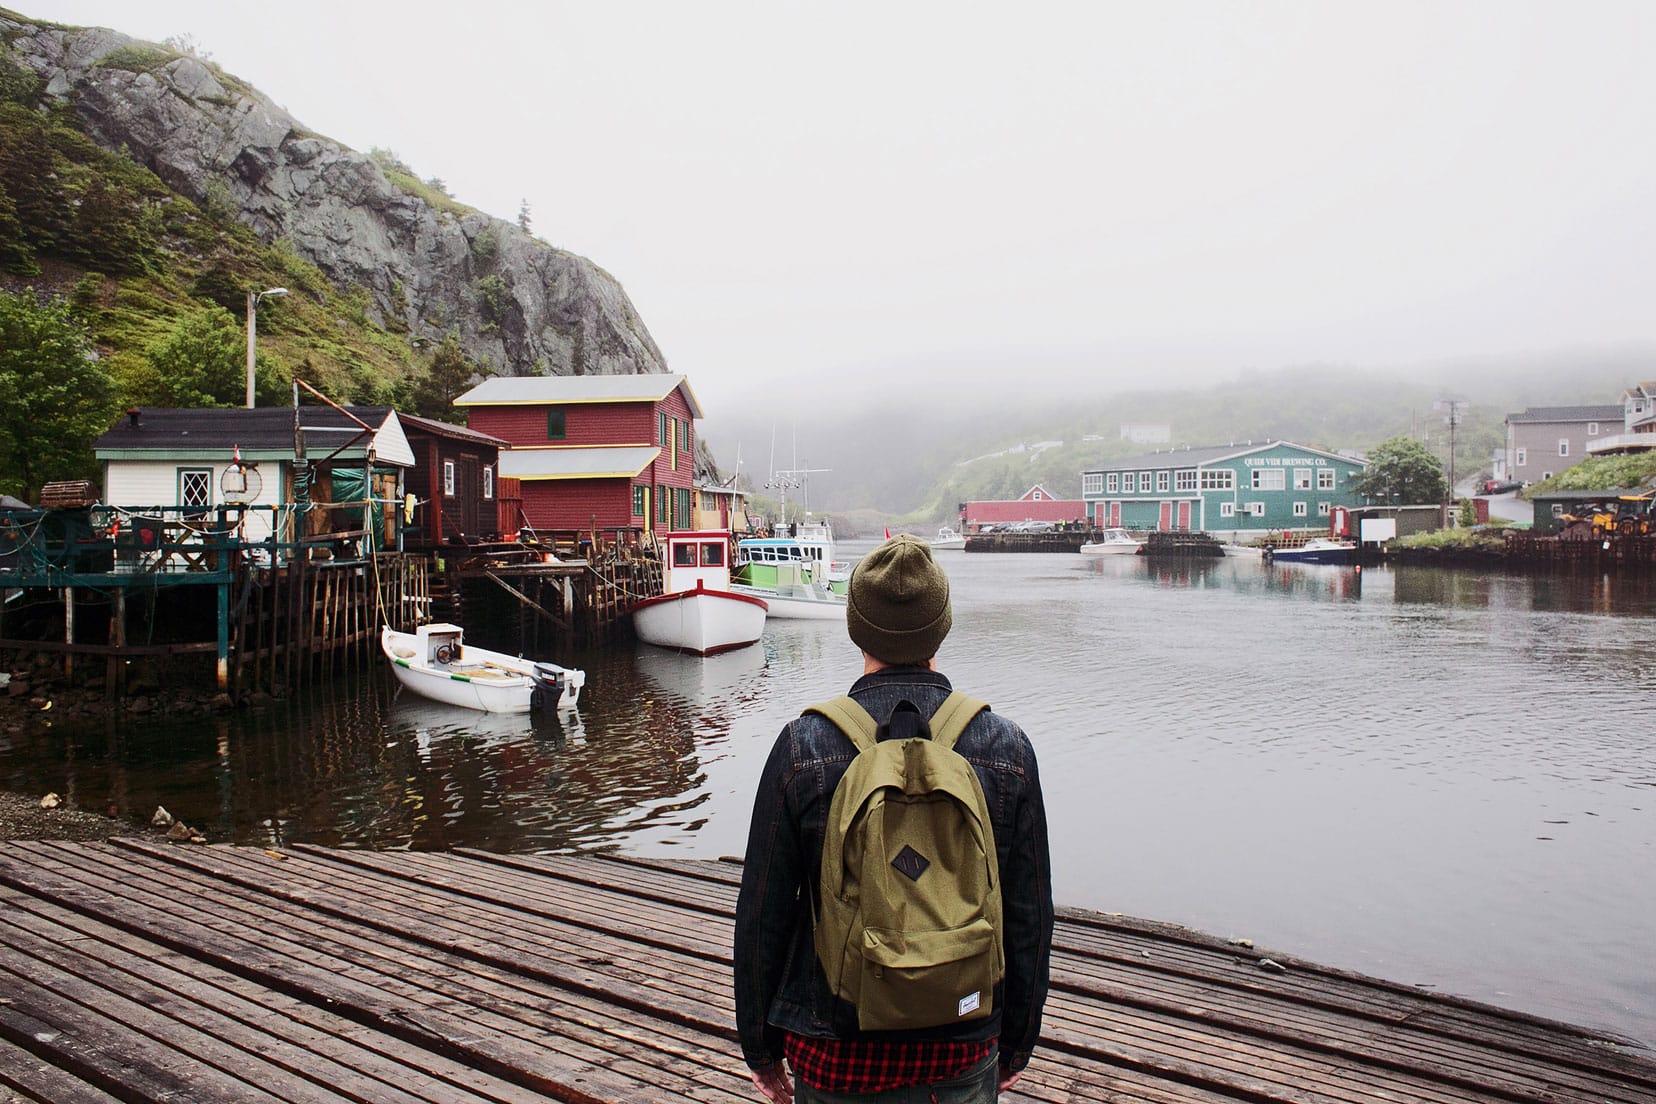 Iceland, Ireland, Norway, England, France and Denmark are travel destinations that are likely on your radar. But what if I told you that you could experience all of these cultures and environments in one place? Welcome to St. John’s, the capital of city of Newfoundland and Labrador. One of the most eastern places in North America, St. John’s offers history, nature, wildlife and culture. Here’s why you should go.